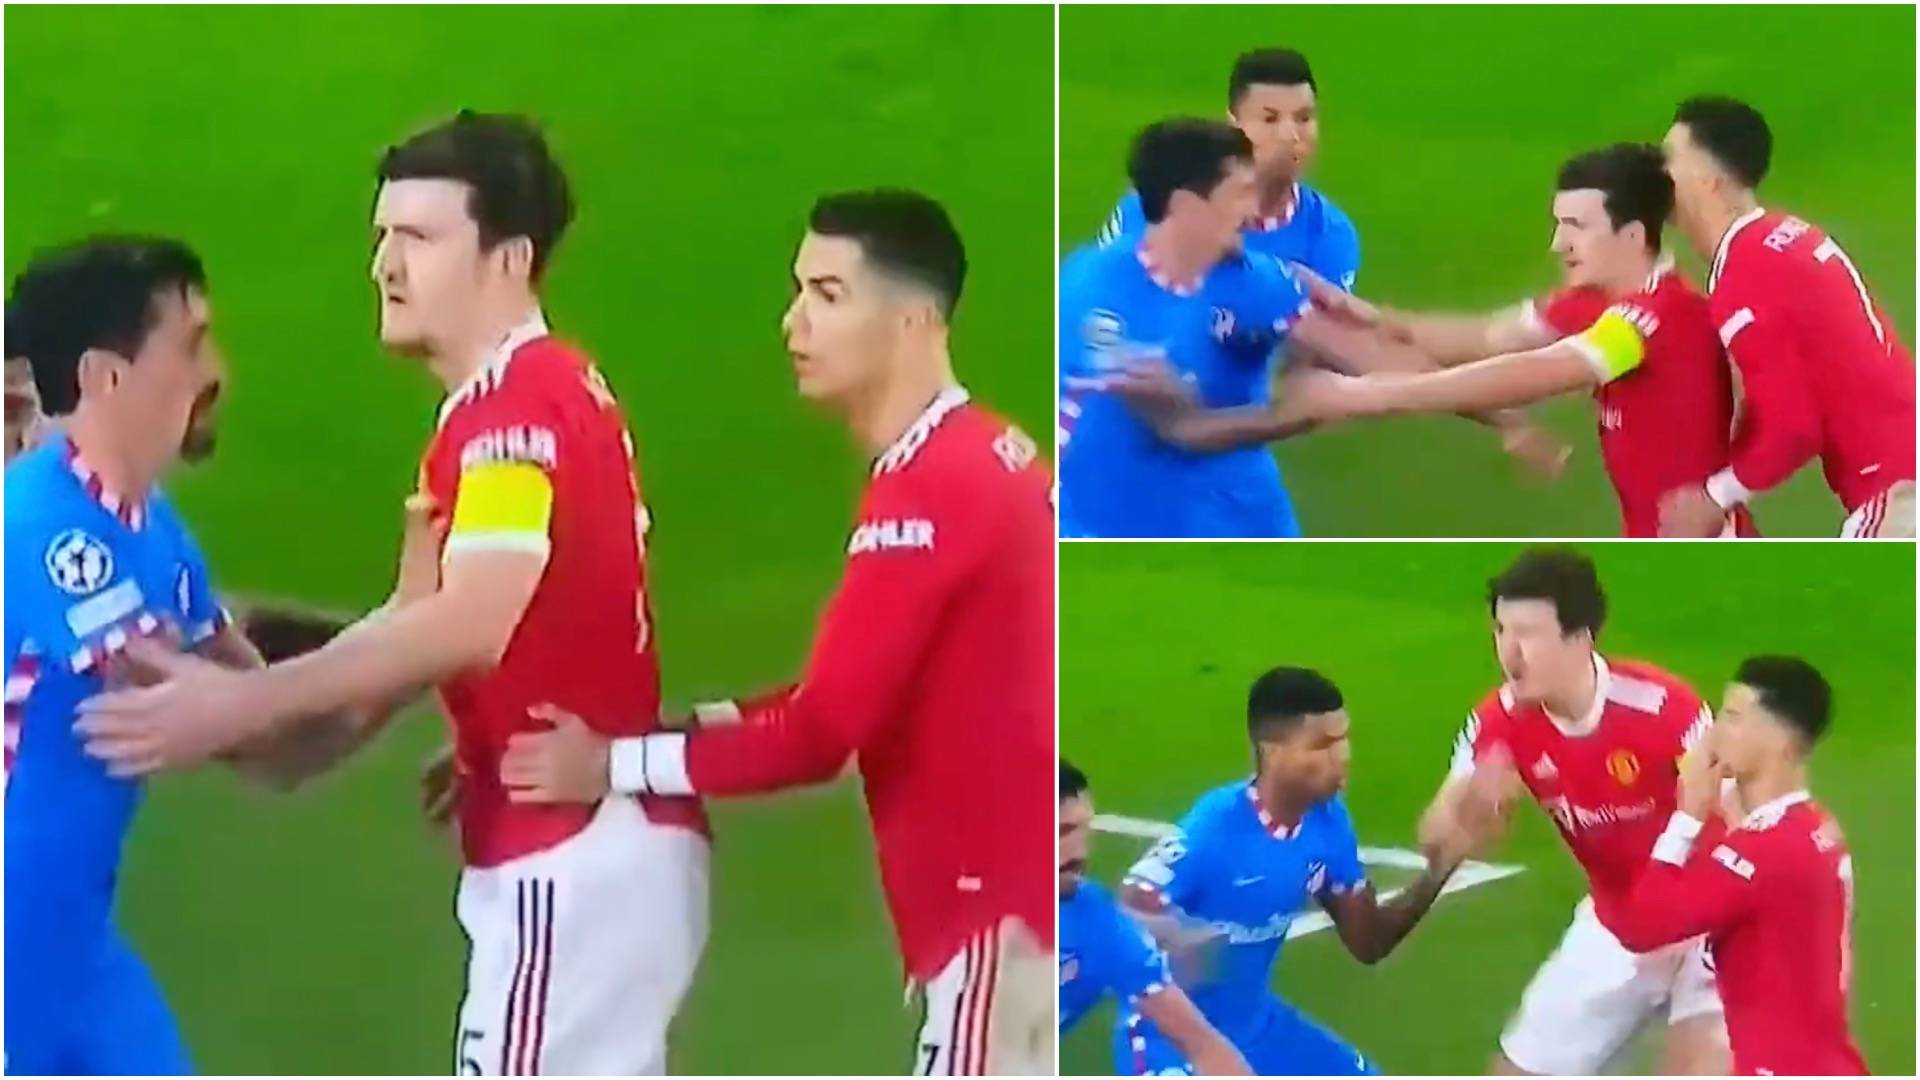 Harry Maguire almost knocking out Ronaldo’s teeth summed up Man Utd’s second half vs Atletico